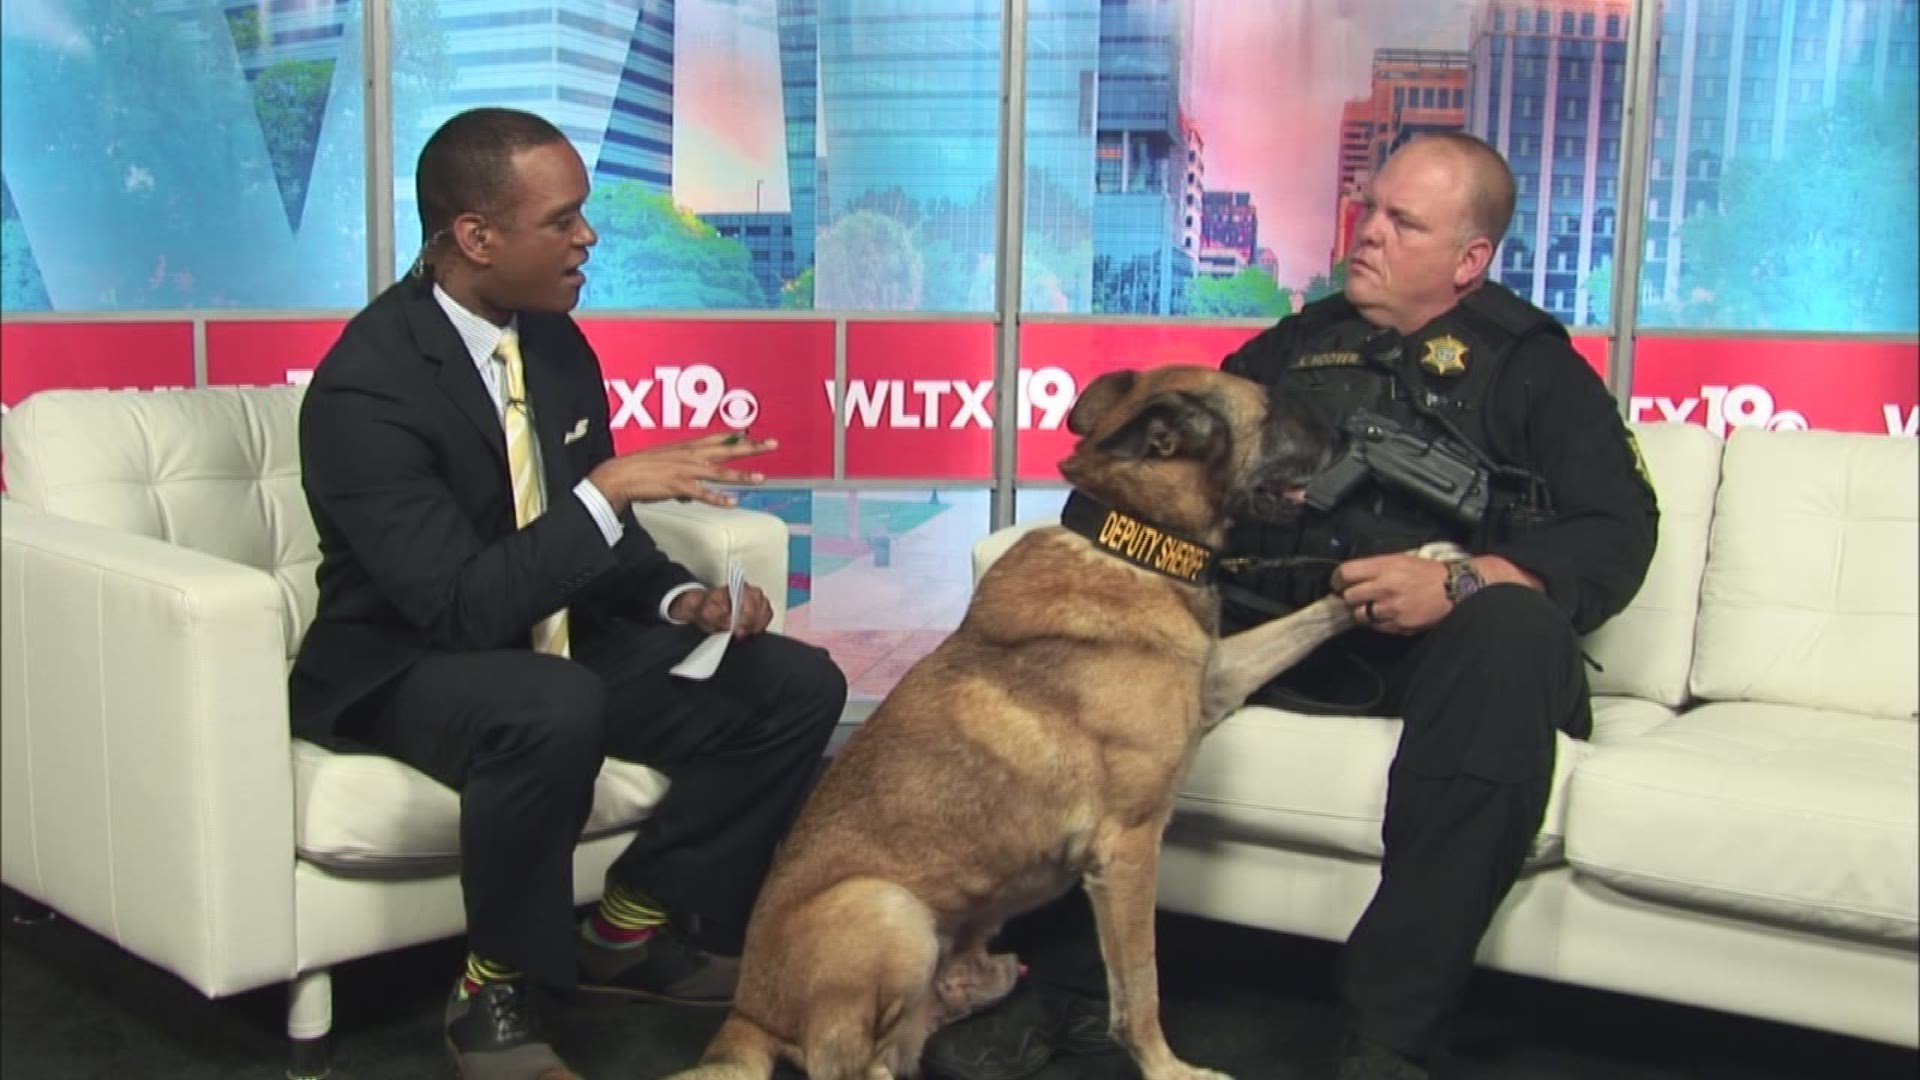 LT. Kevin Hoover, with the Richland County Sheriff's Department, brought in his friend, Arko, to discuss how you can support the 7th Annual Guardians of the Night K-9 run walk.